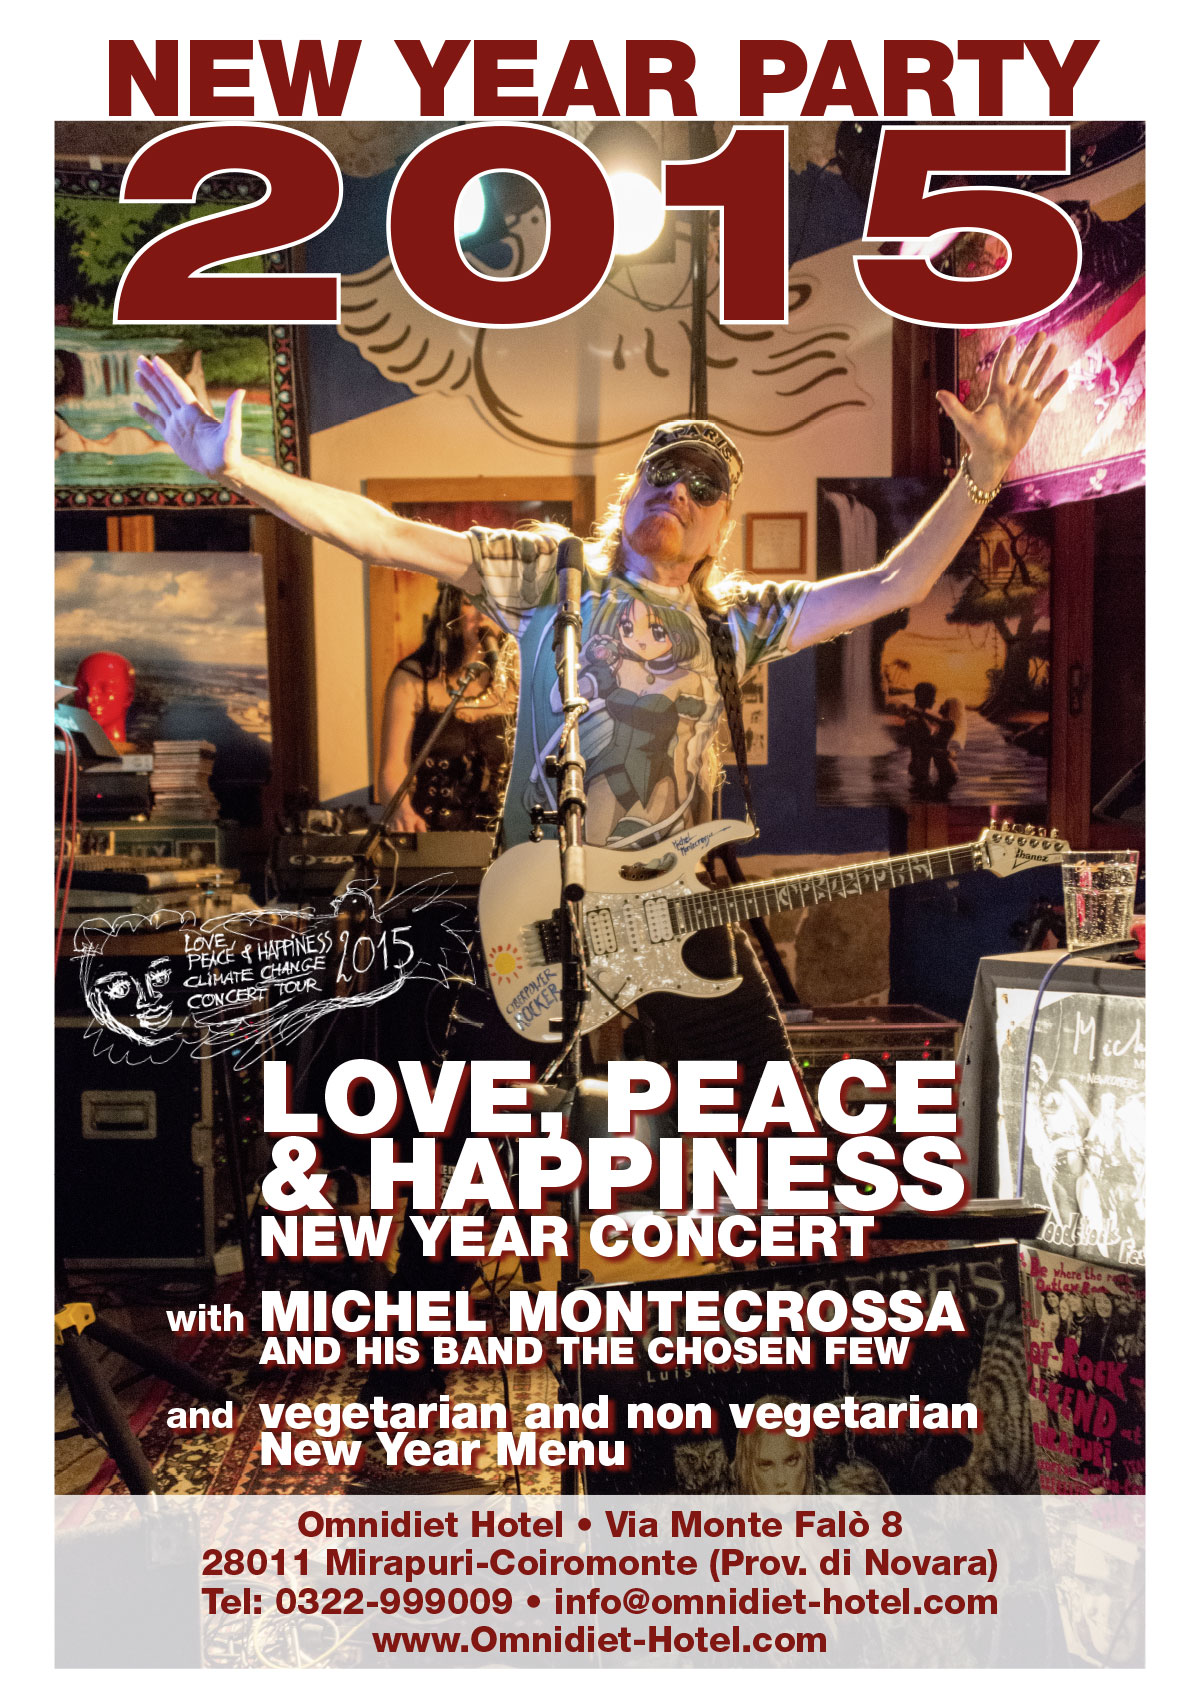 Love, Peace & Happiness New Year Concert